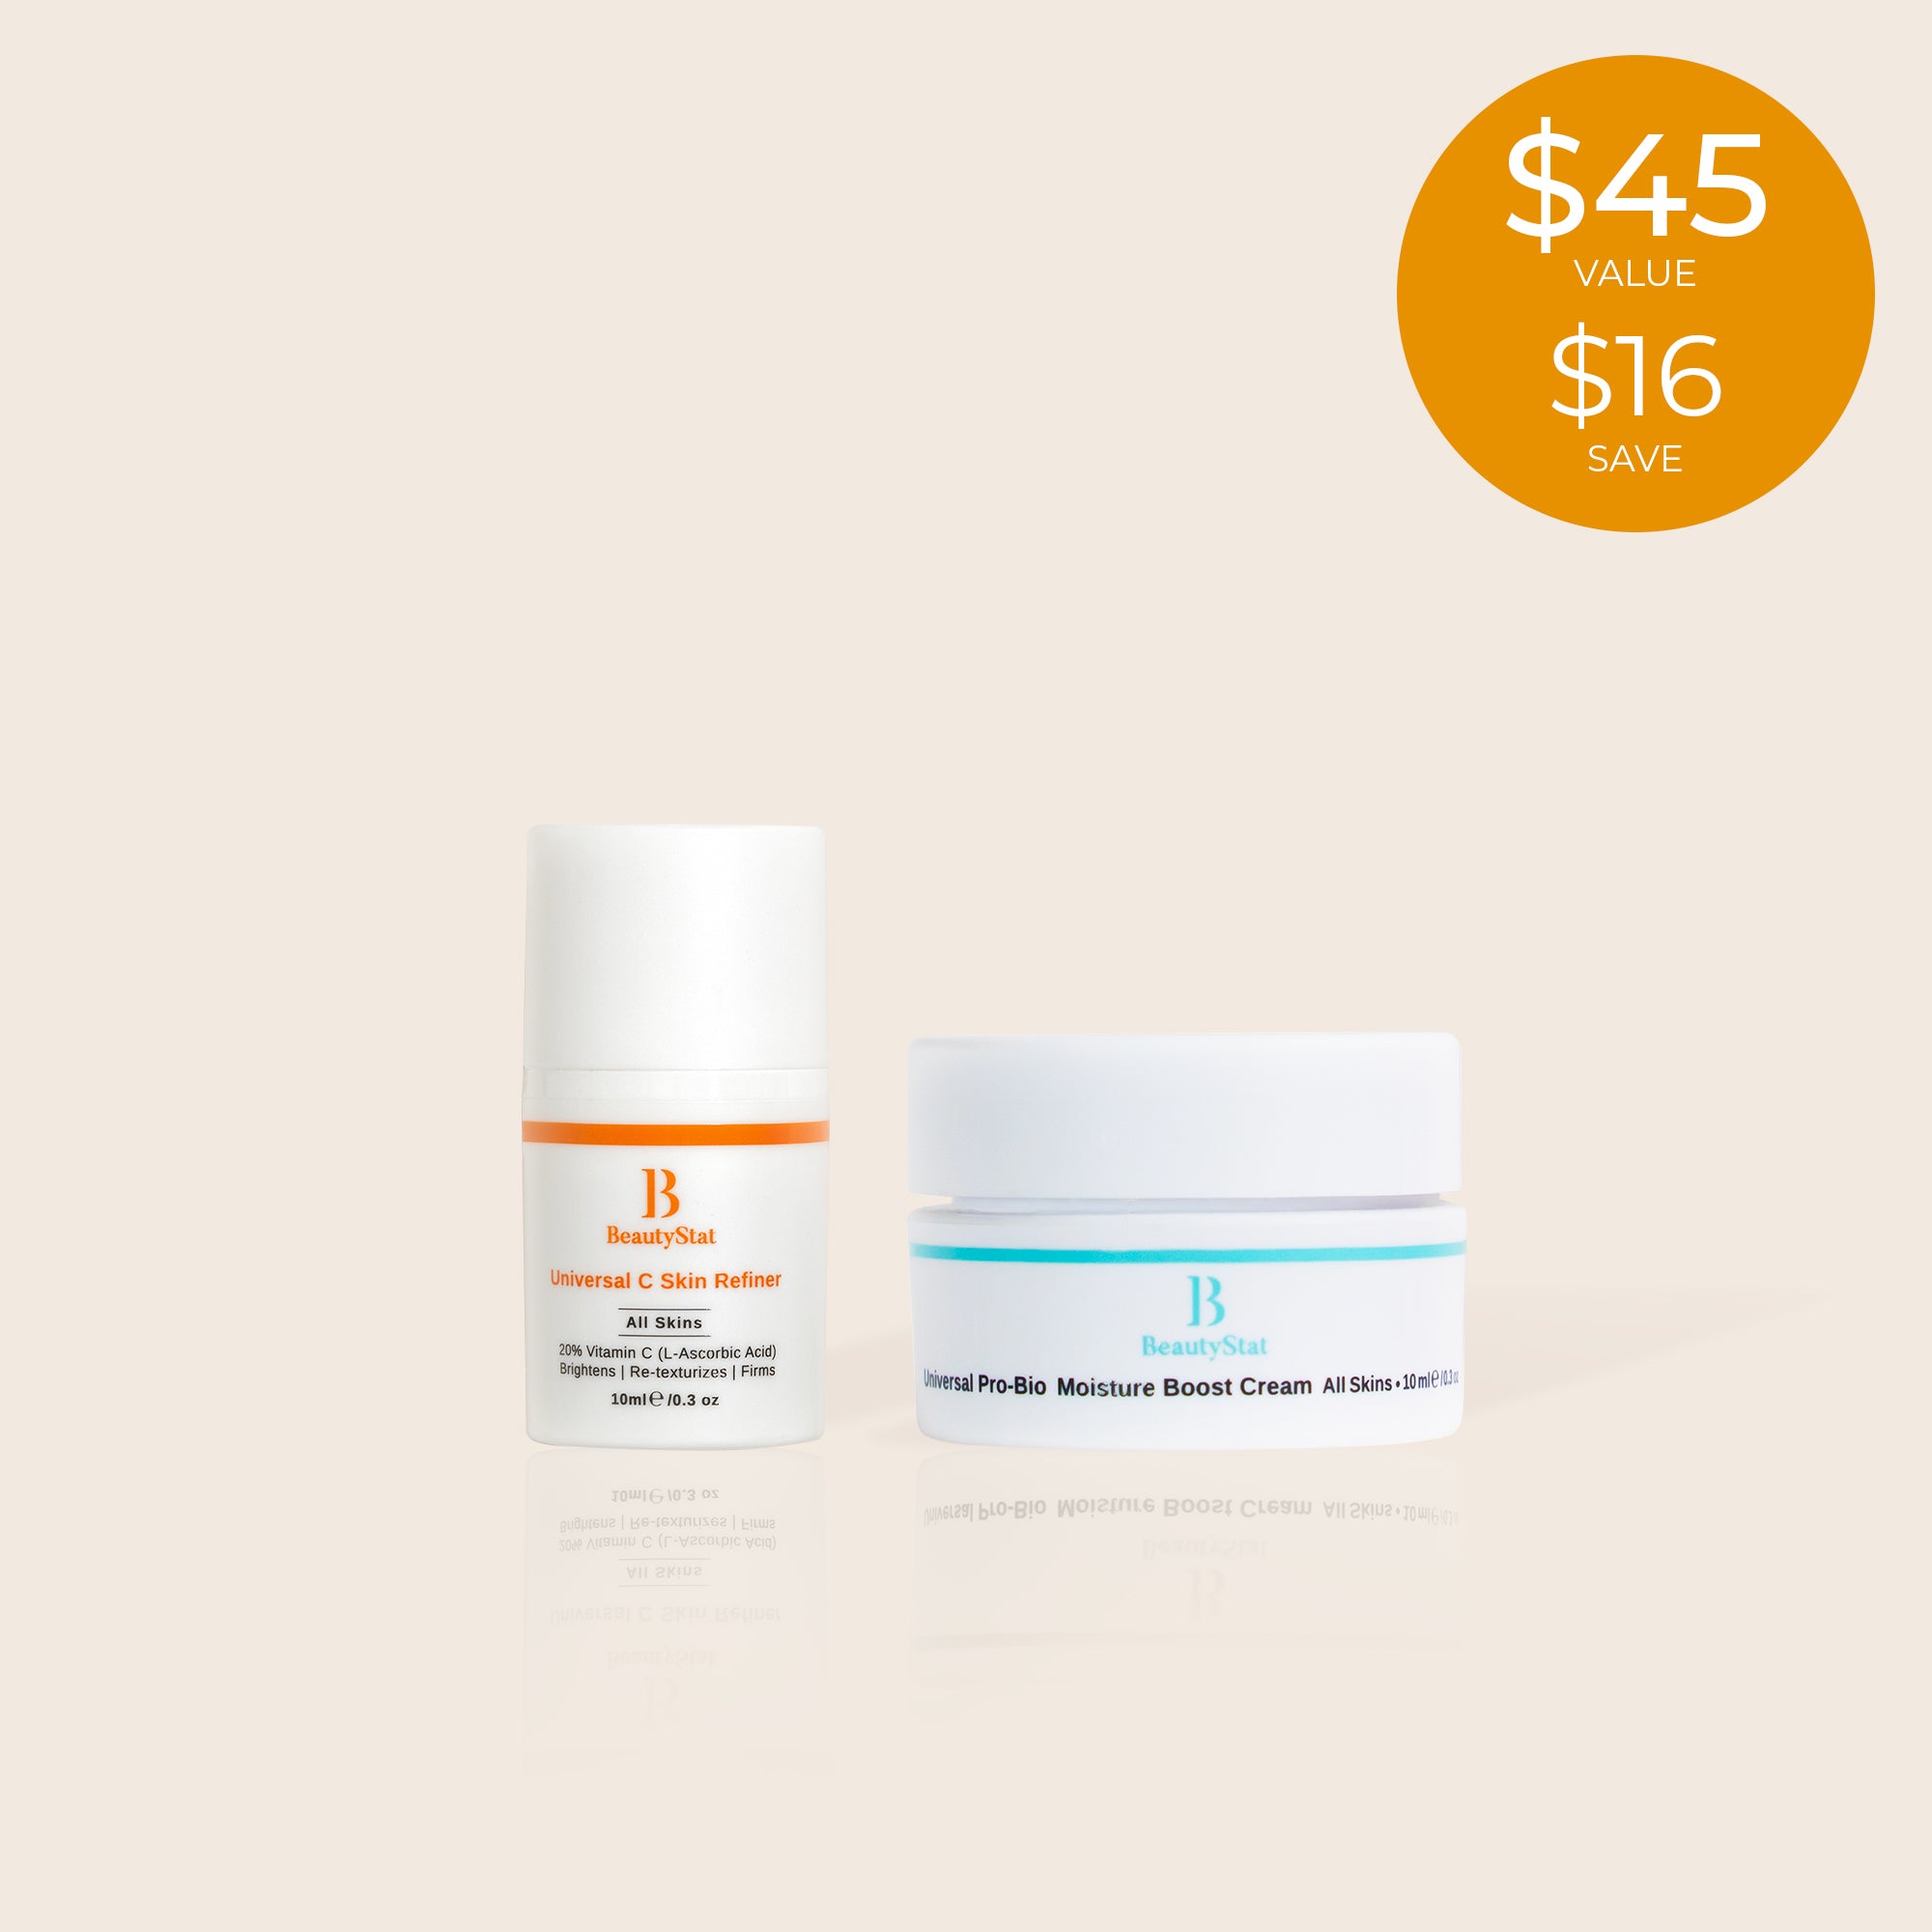 BUY 2 GET 1 FREE - Glowing Skincare Essentials Travel Duo Kit